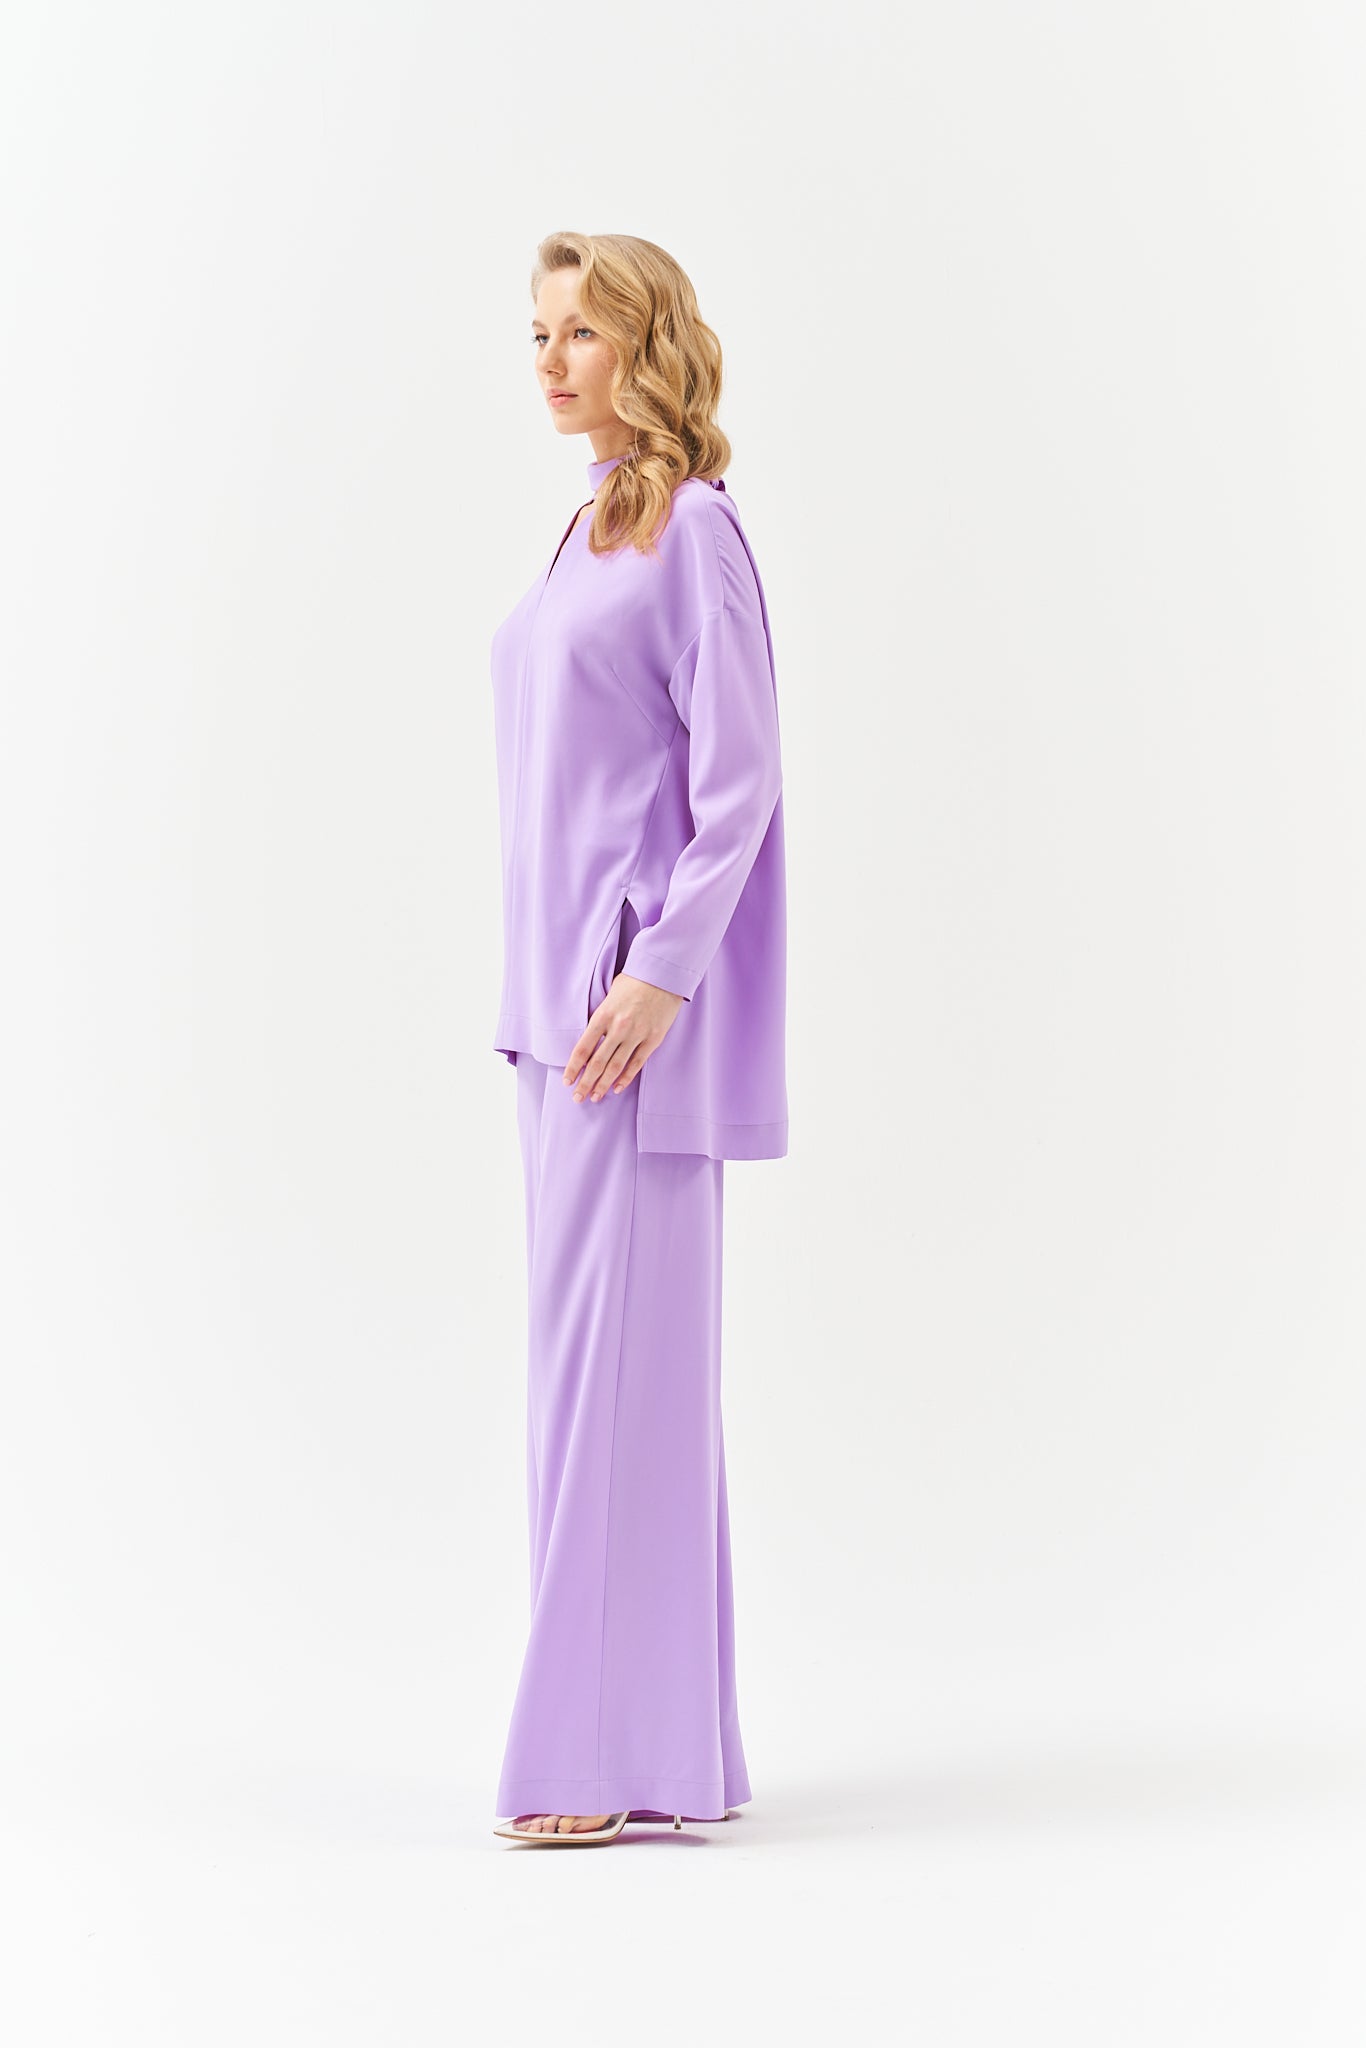 TIE NECK LONG SLEEVE BLOUSE IN LILAC